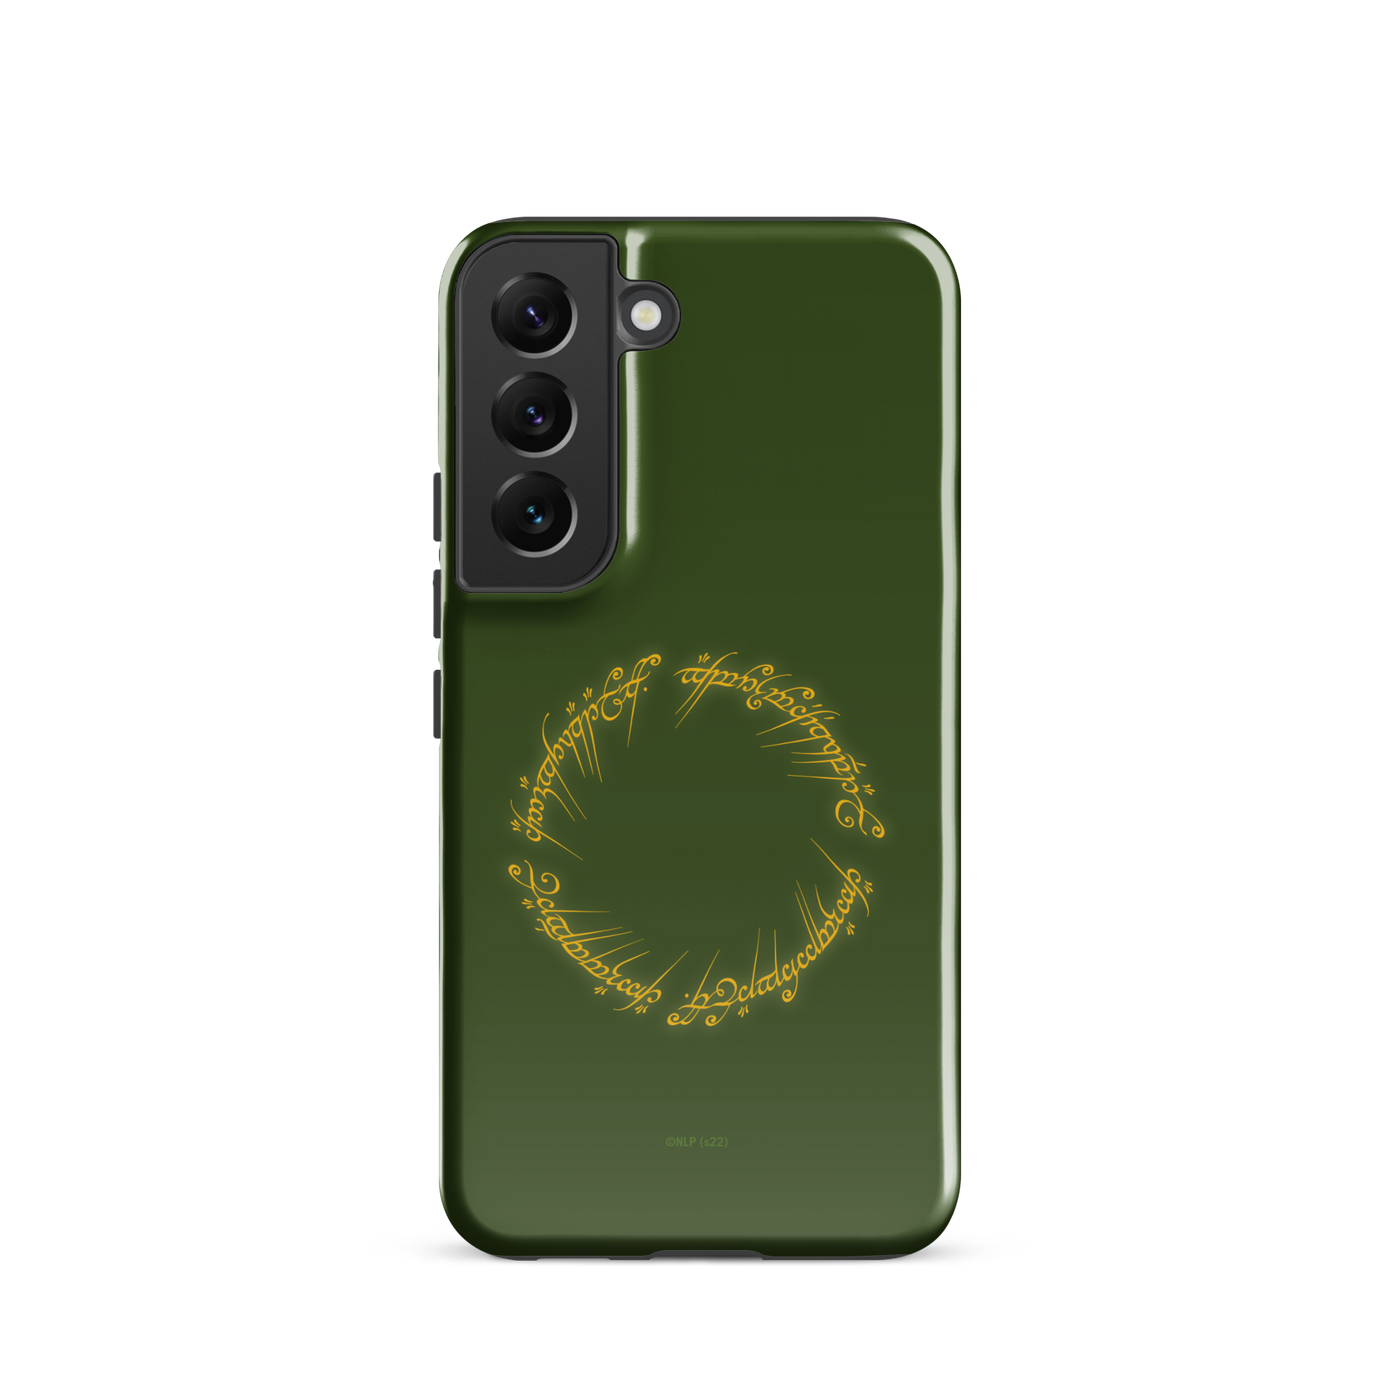 Lord of the Rings One Ring Tough Phone Case - Samsung